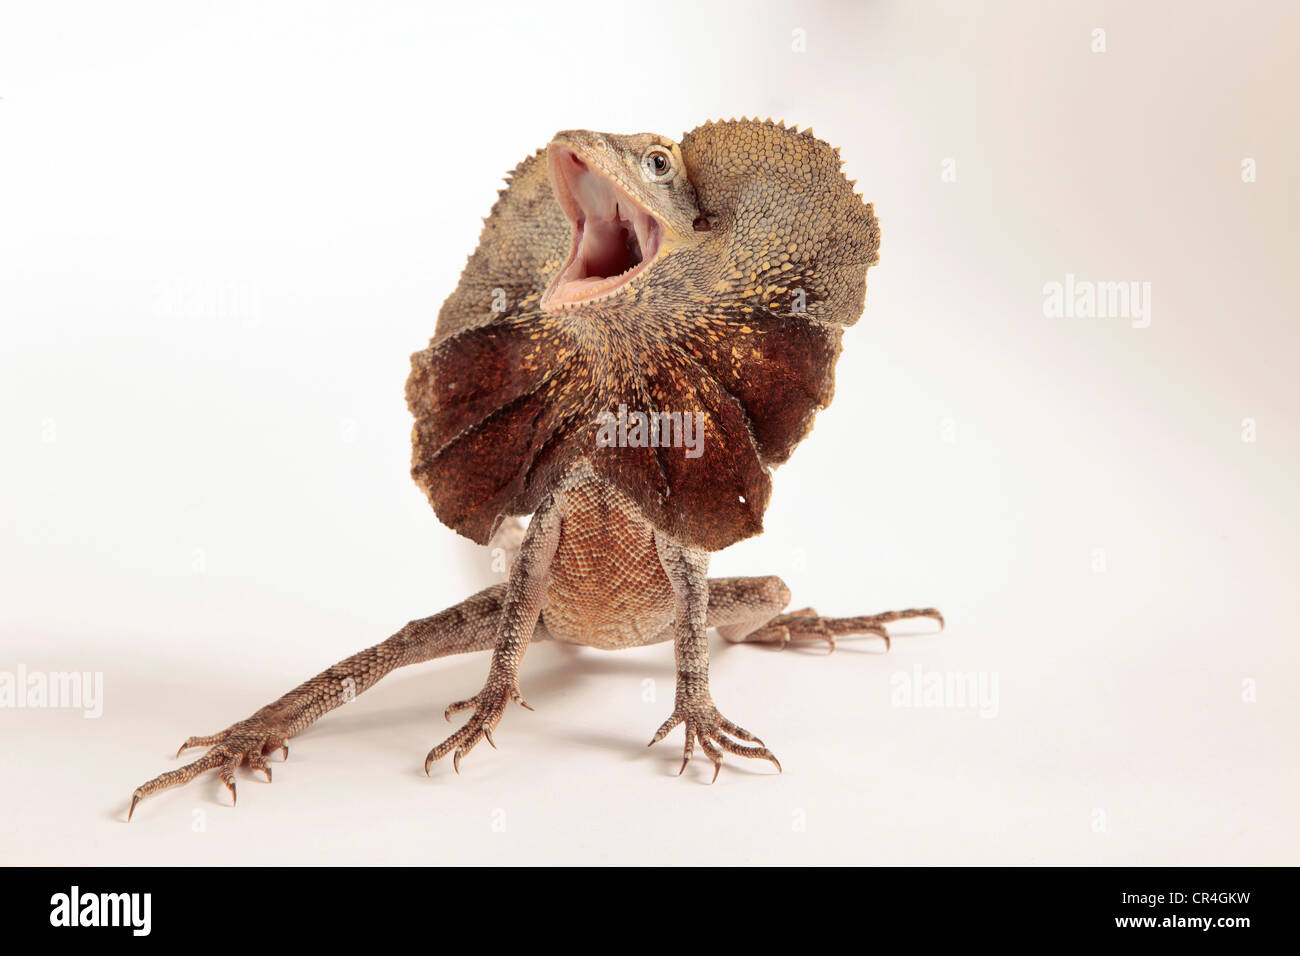 Frilled Dragon showing its frill around its neck in a studio shot on a plain background Stock Photo